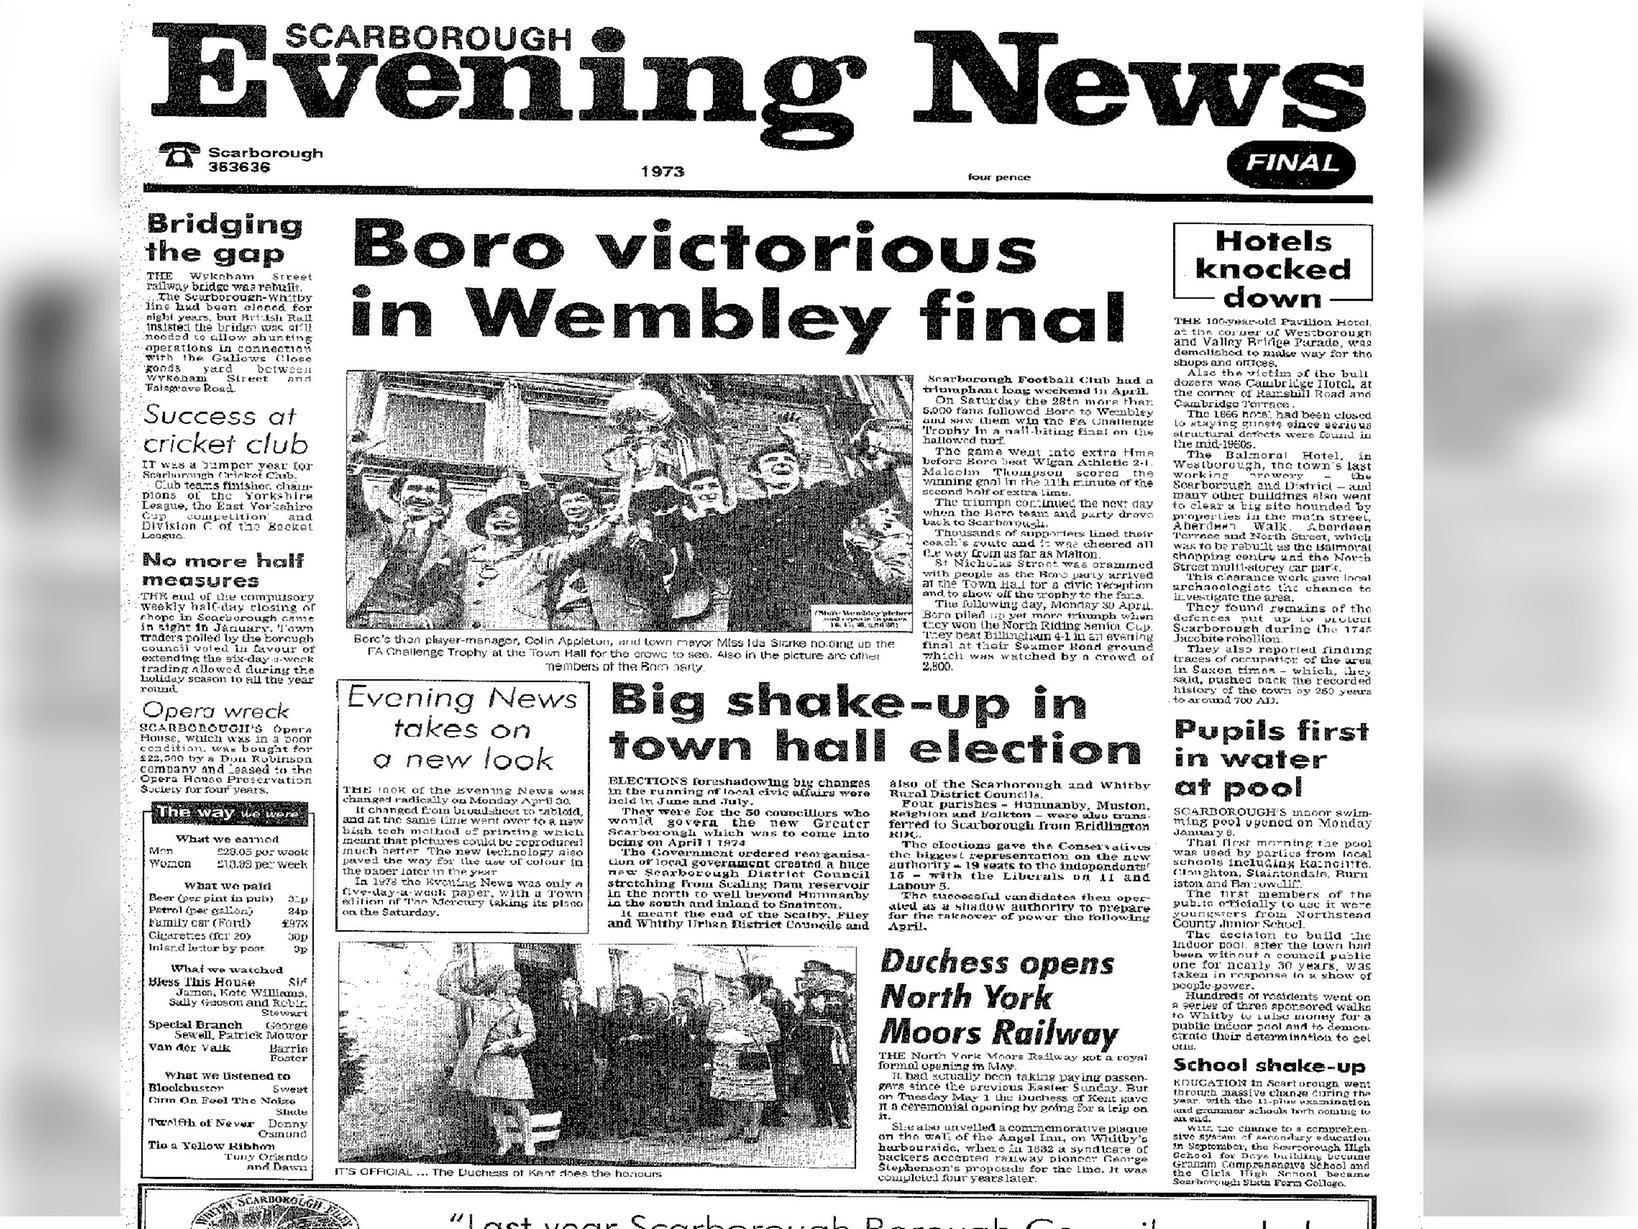 Scarborough Football Club won the FA Challenge Trophy after beating Wigan Athletic 2-1 at Wembley. Other stories featured include the demolition of the Pavilion Hotel and the opening of the indoor pool.